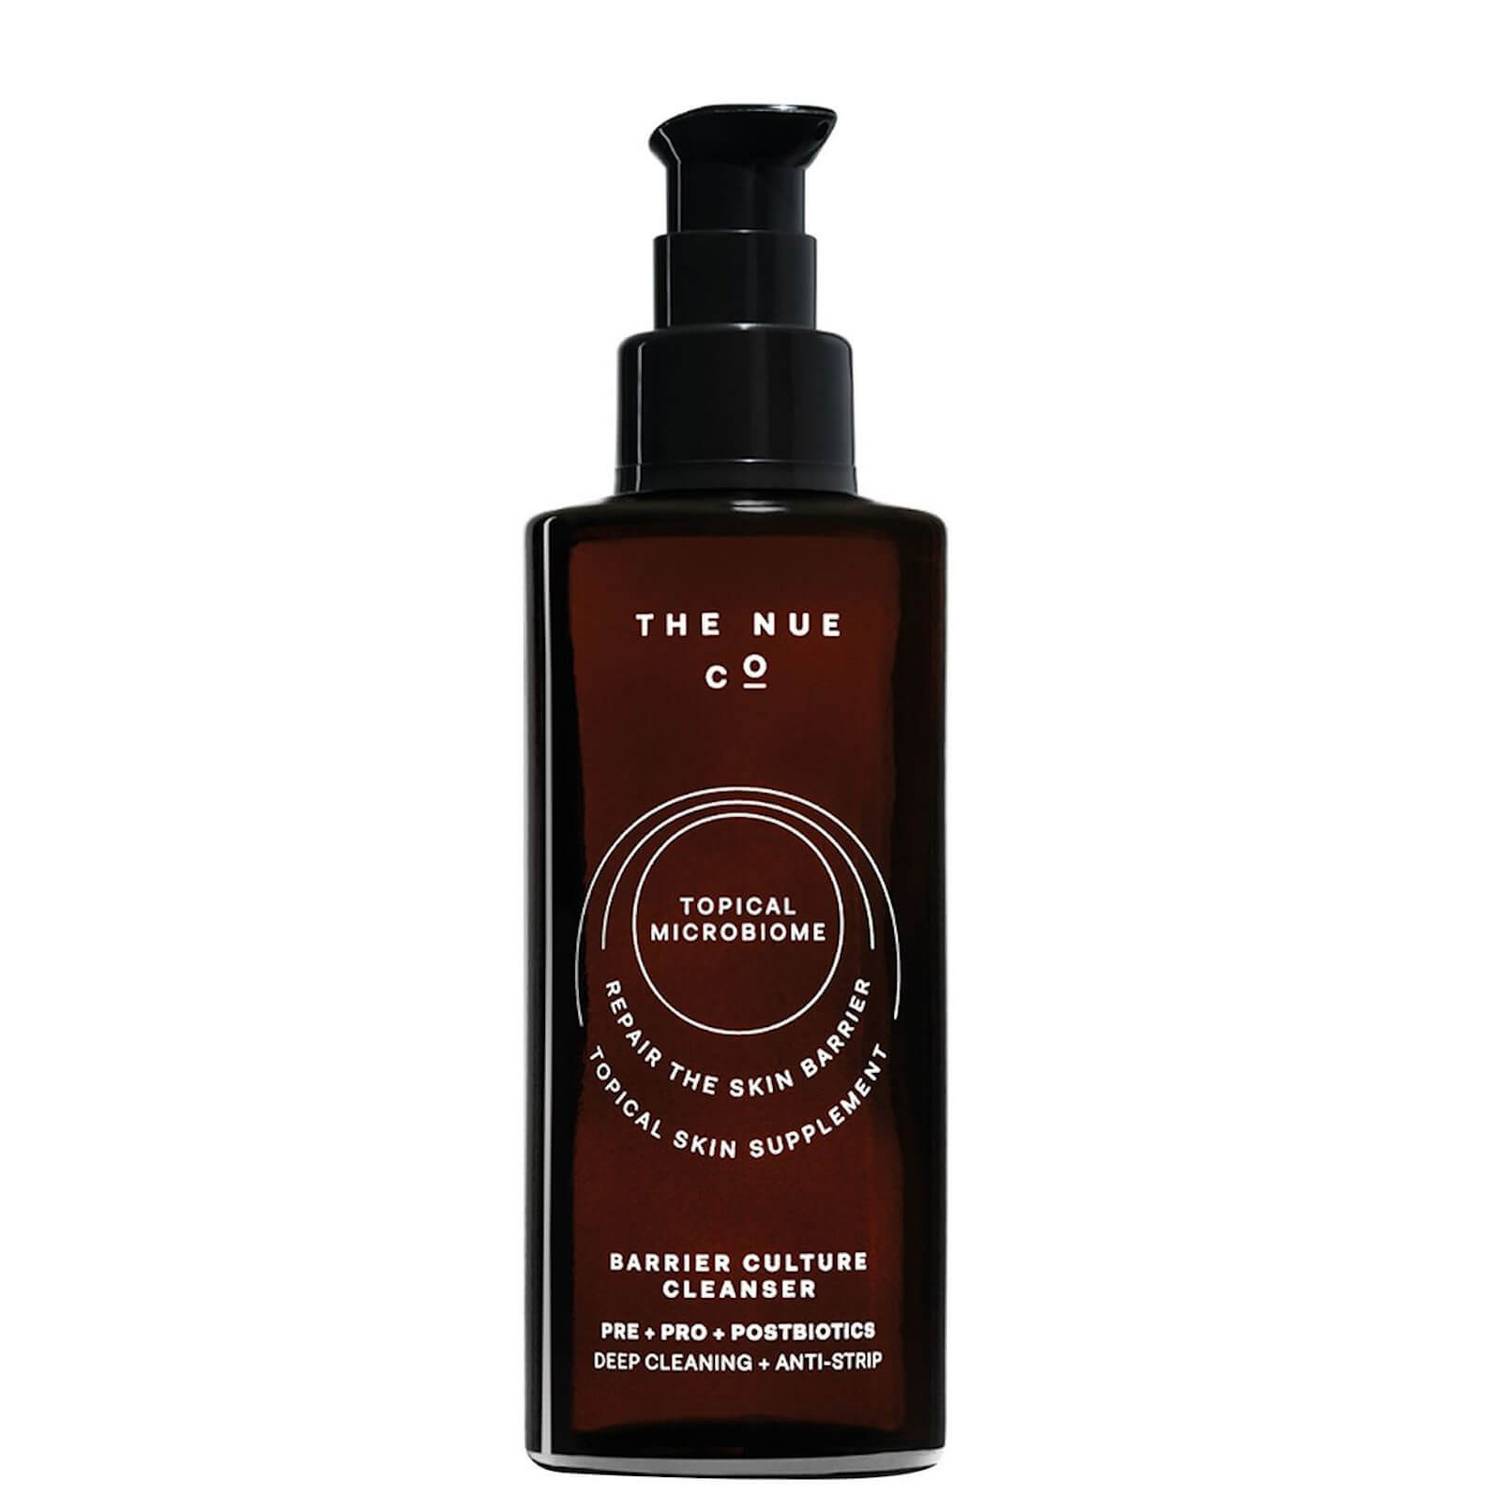 The Nue Co. Barrier Culture Cleanser image